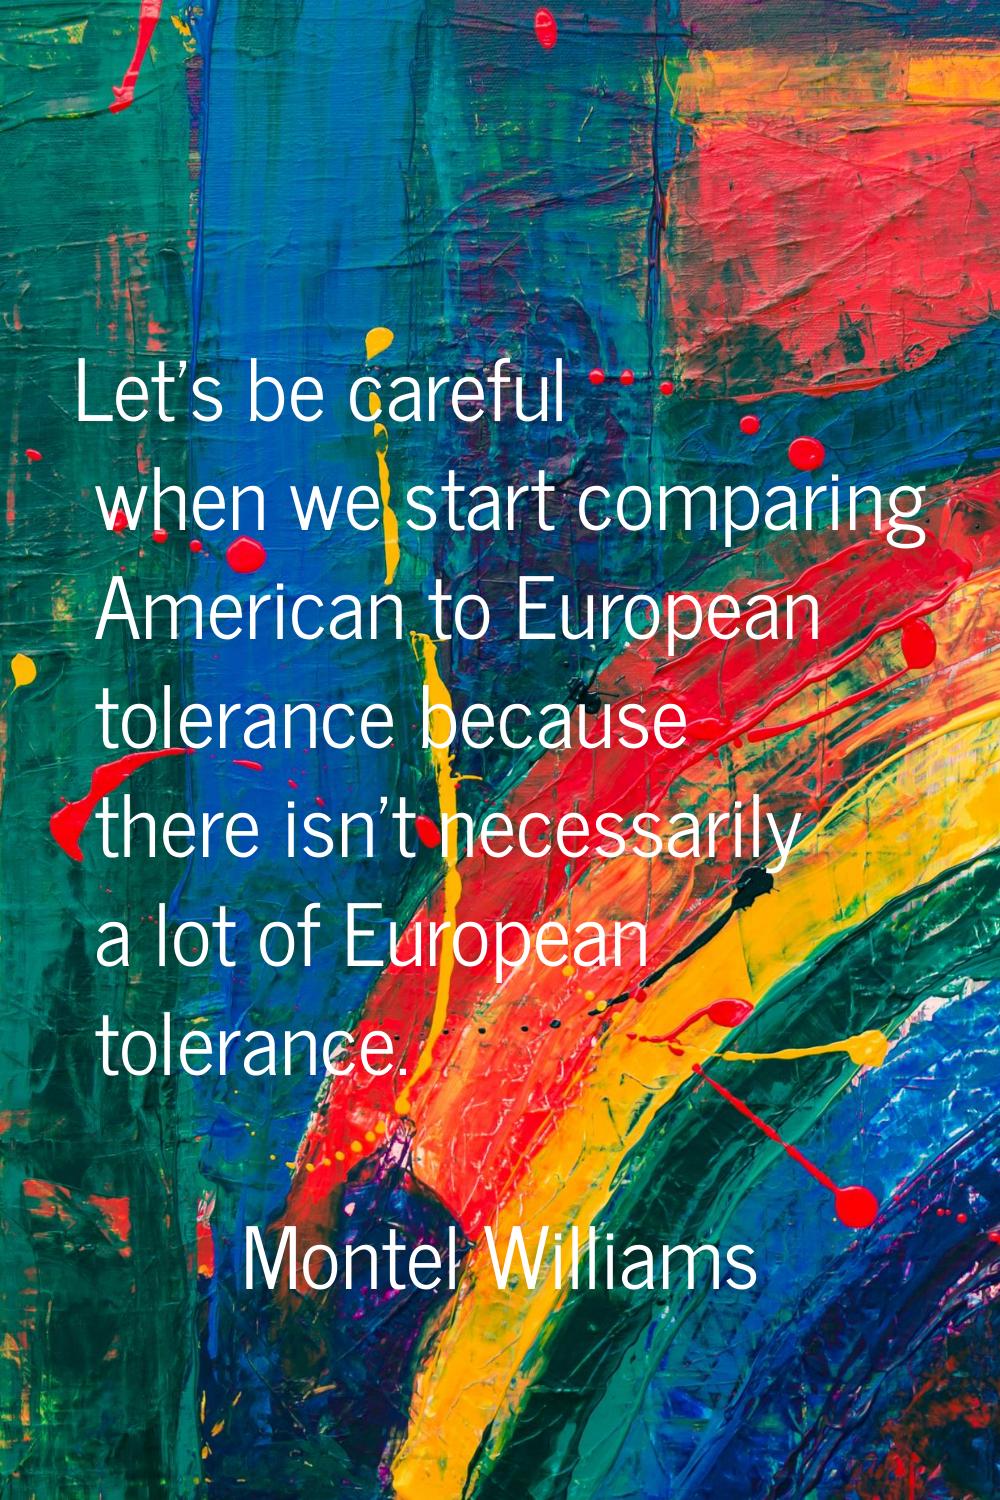 Let's be careful when we start comparing American to European tolerance because there isn't necessa